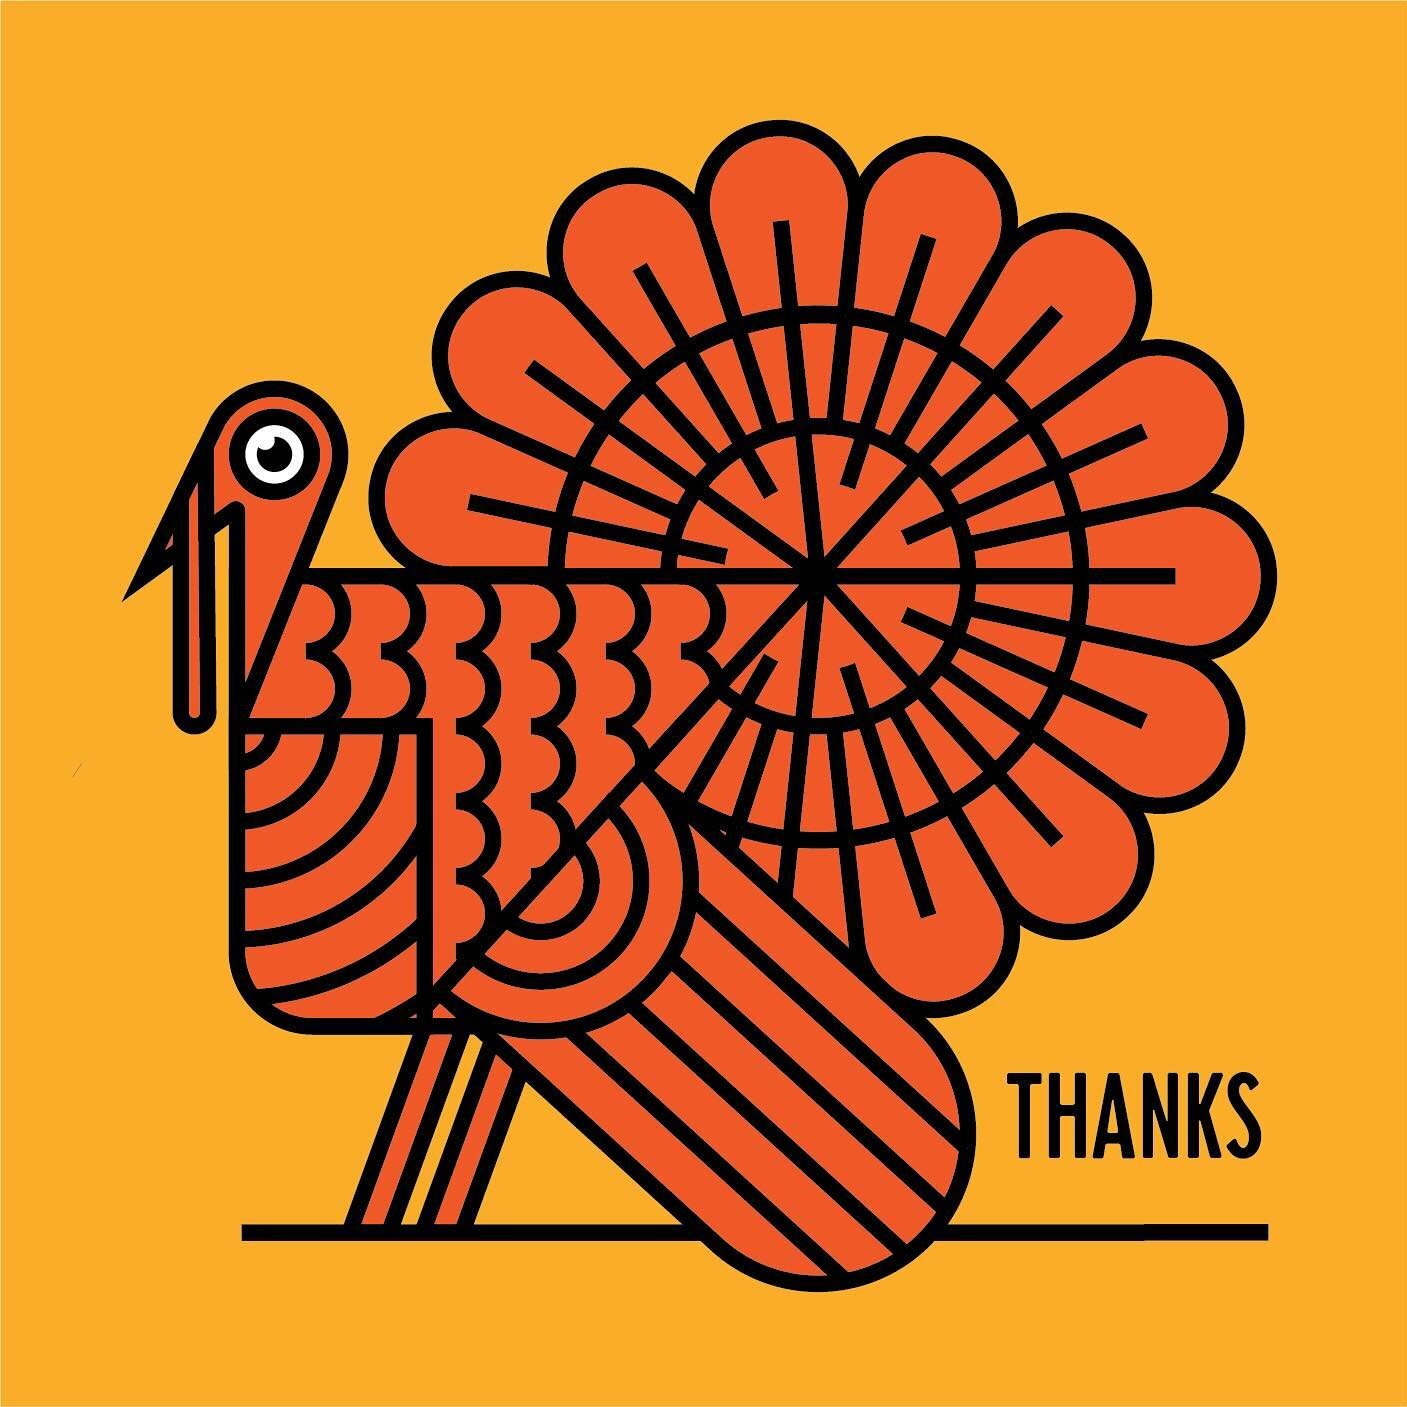 Happy Thanksgiving Season! Swipe to feast your eyes on the sketch and previous efforts. 
&bull;
&bull;
&bull;
&bull;
&bull;
#turkey #thanksgiving #illustrator #graphicdesign #creative #graphic #process #graphics #logodesign #logo #design #logodesigne